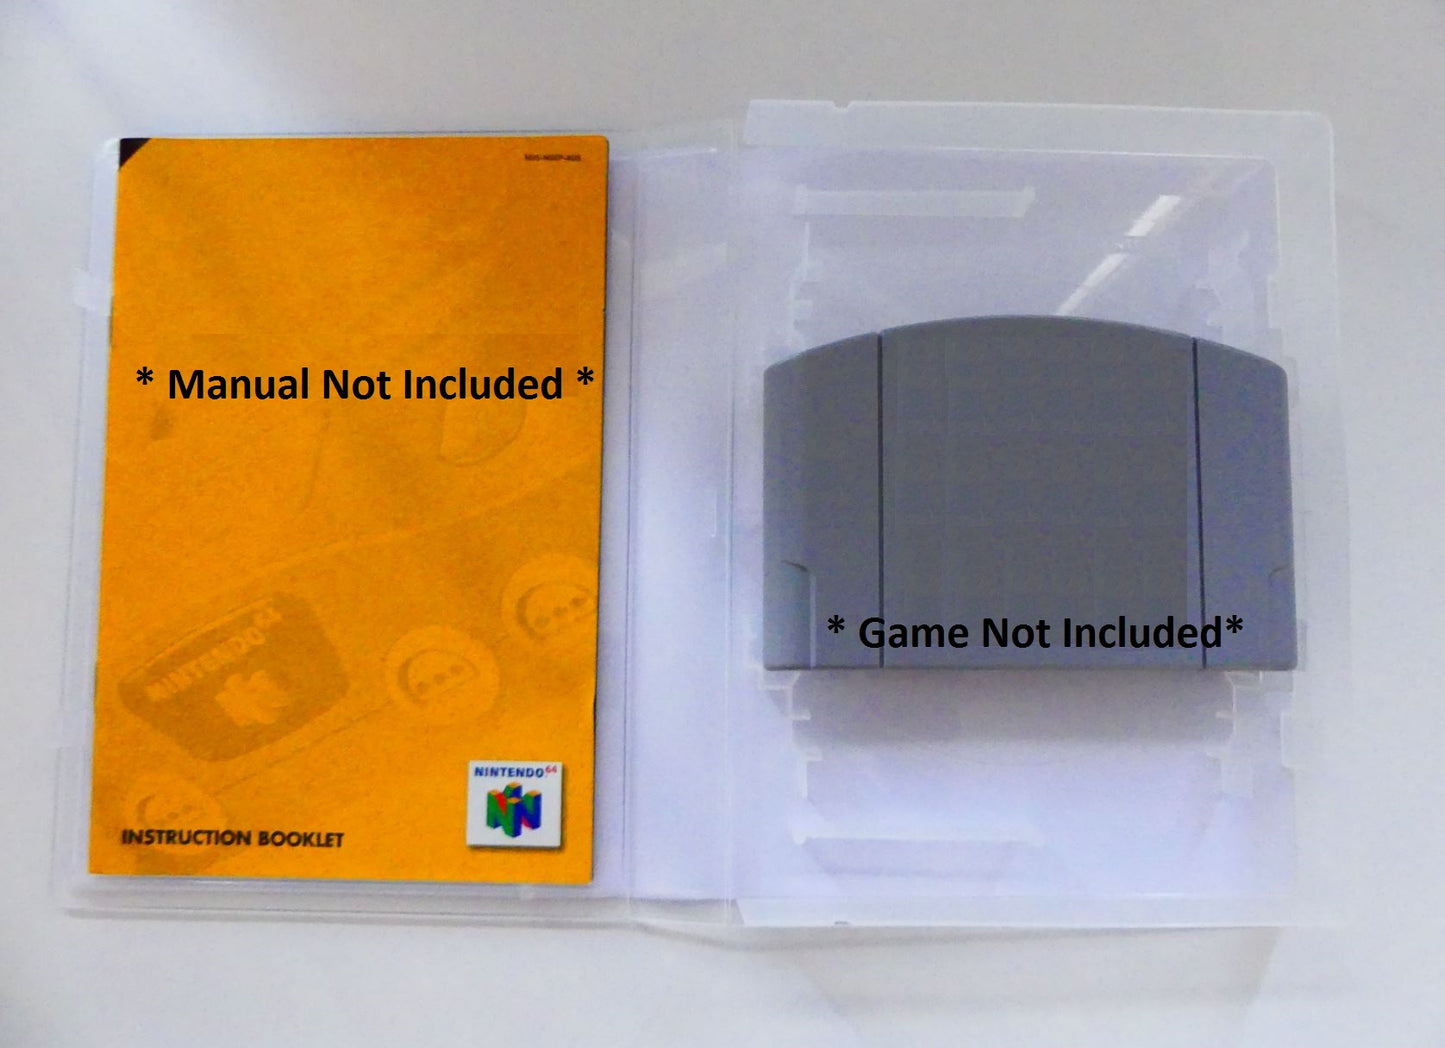 Body Harvest - N64 Replacement Case